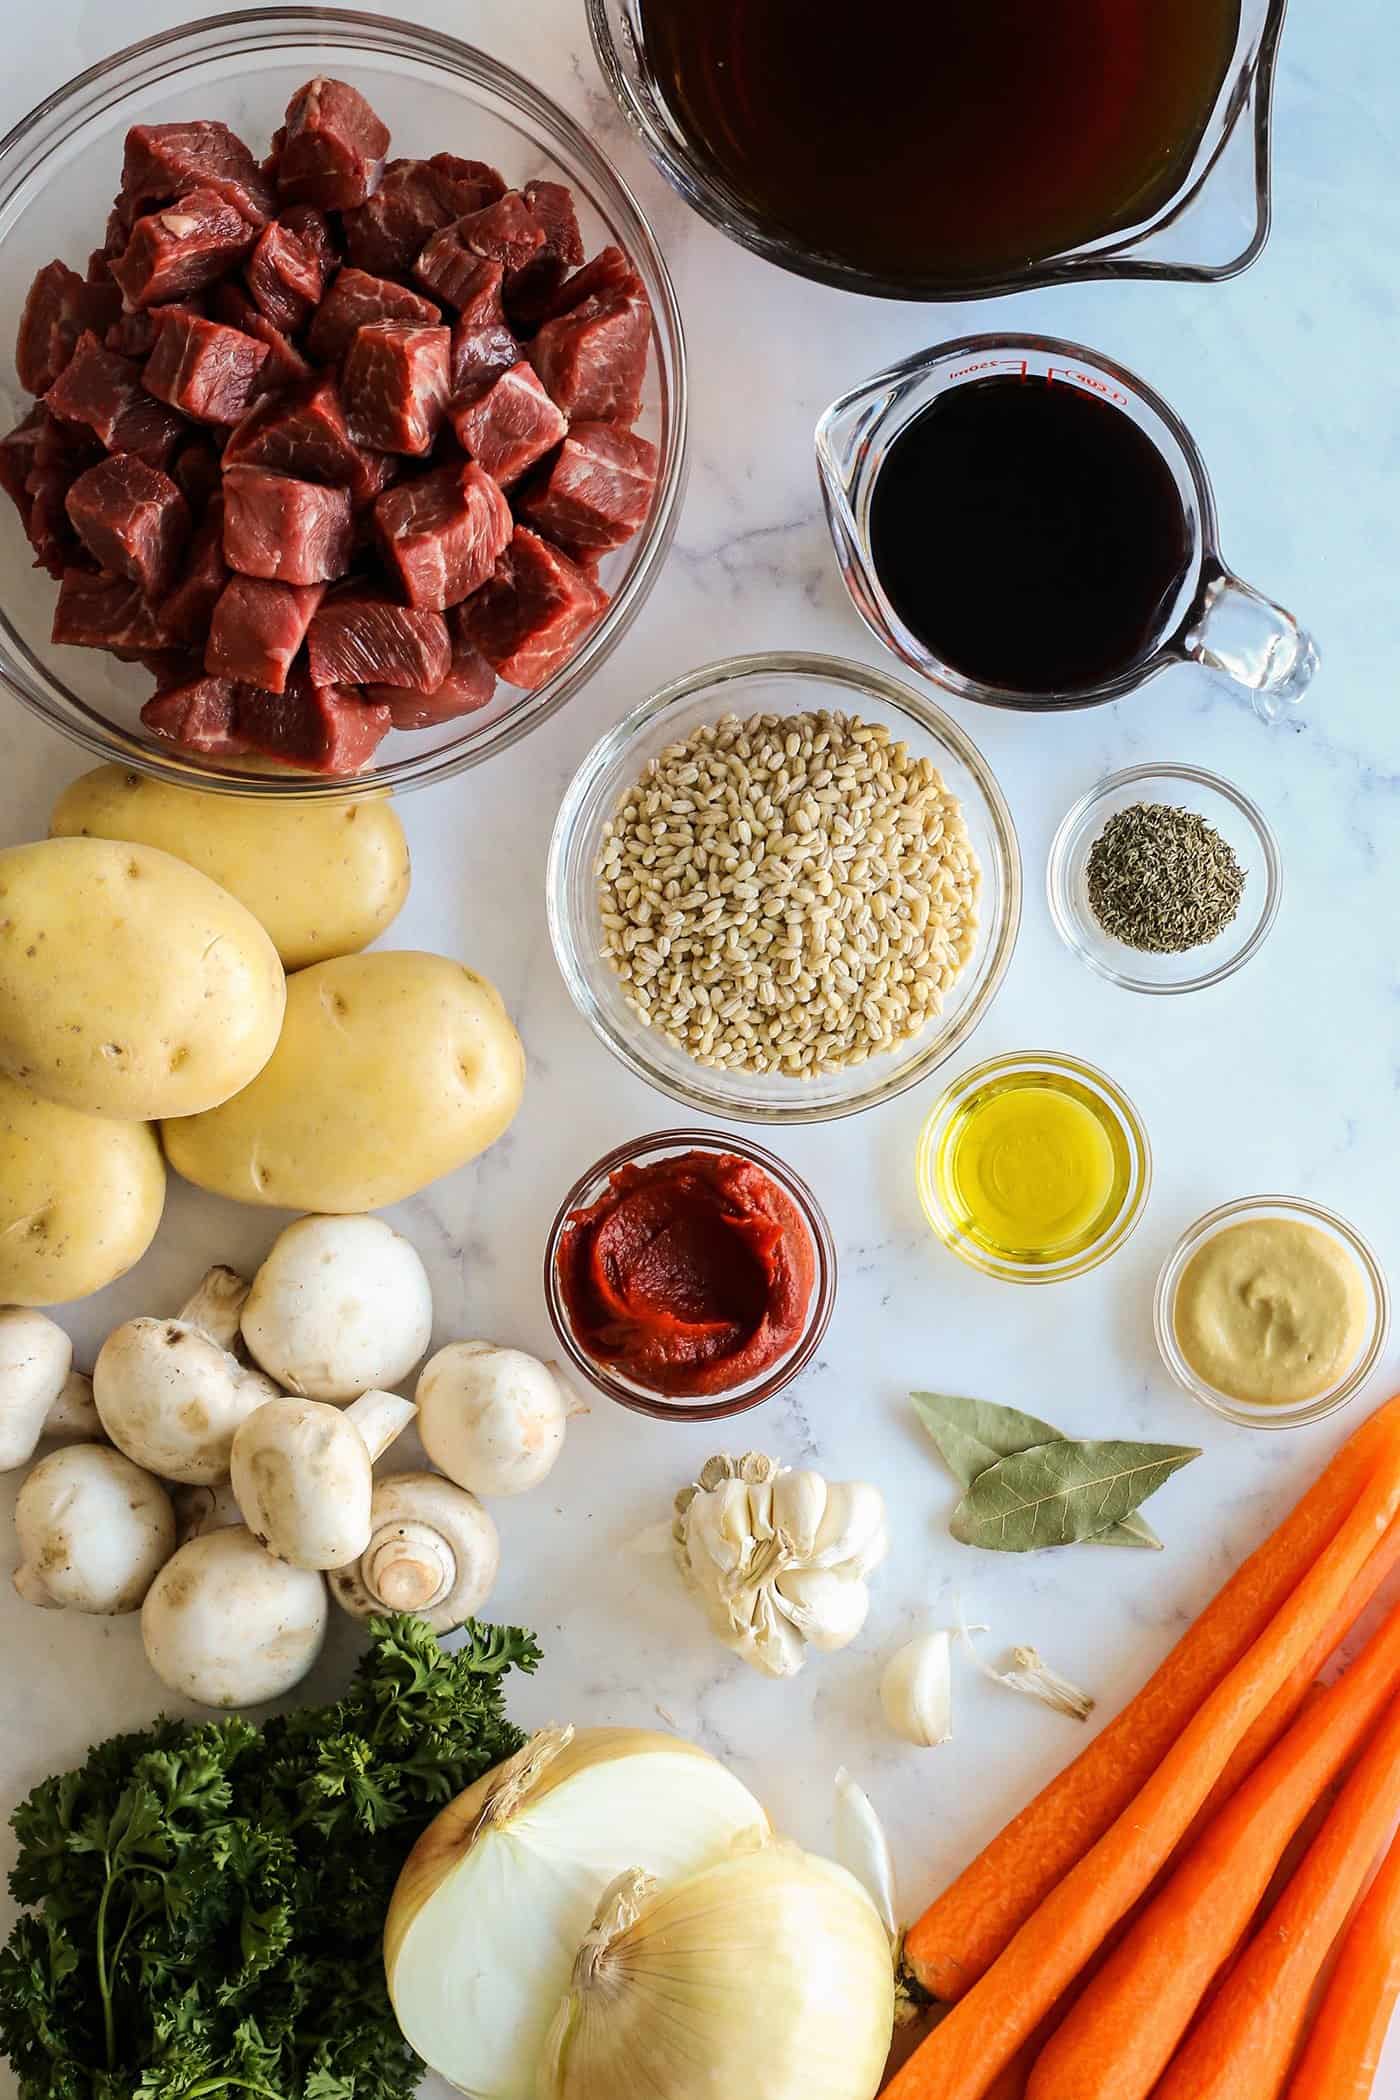 ingredients to make stew, to include cubes of beef, potatoes, barley, onion, mushrooms, carrots, beef stock, and red wine